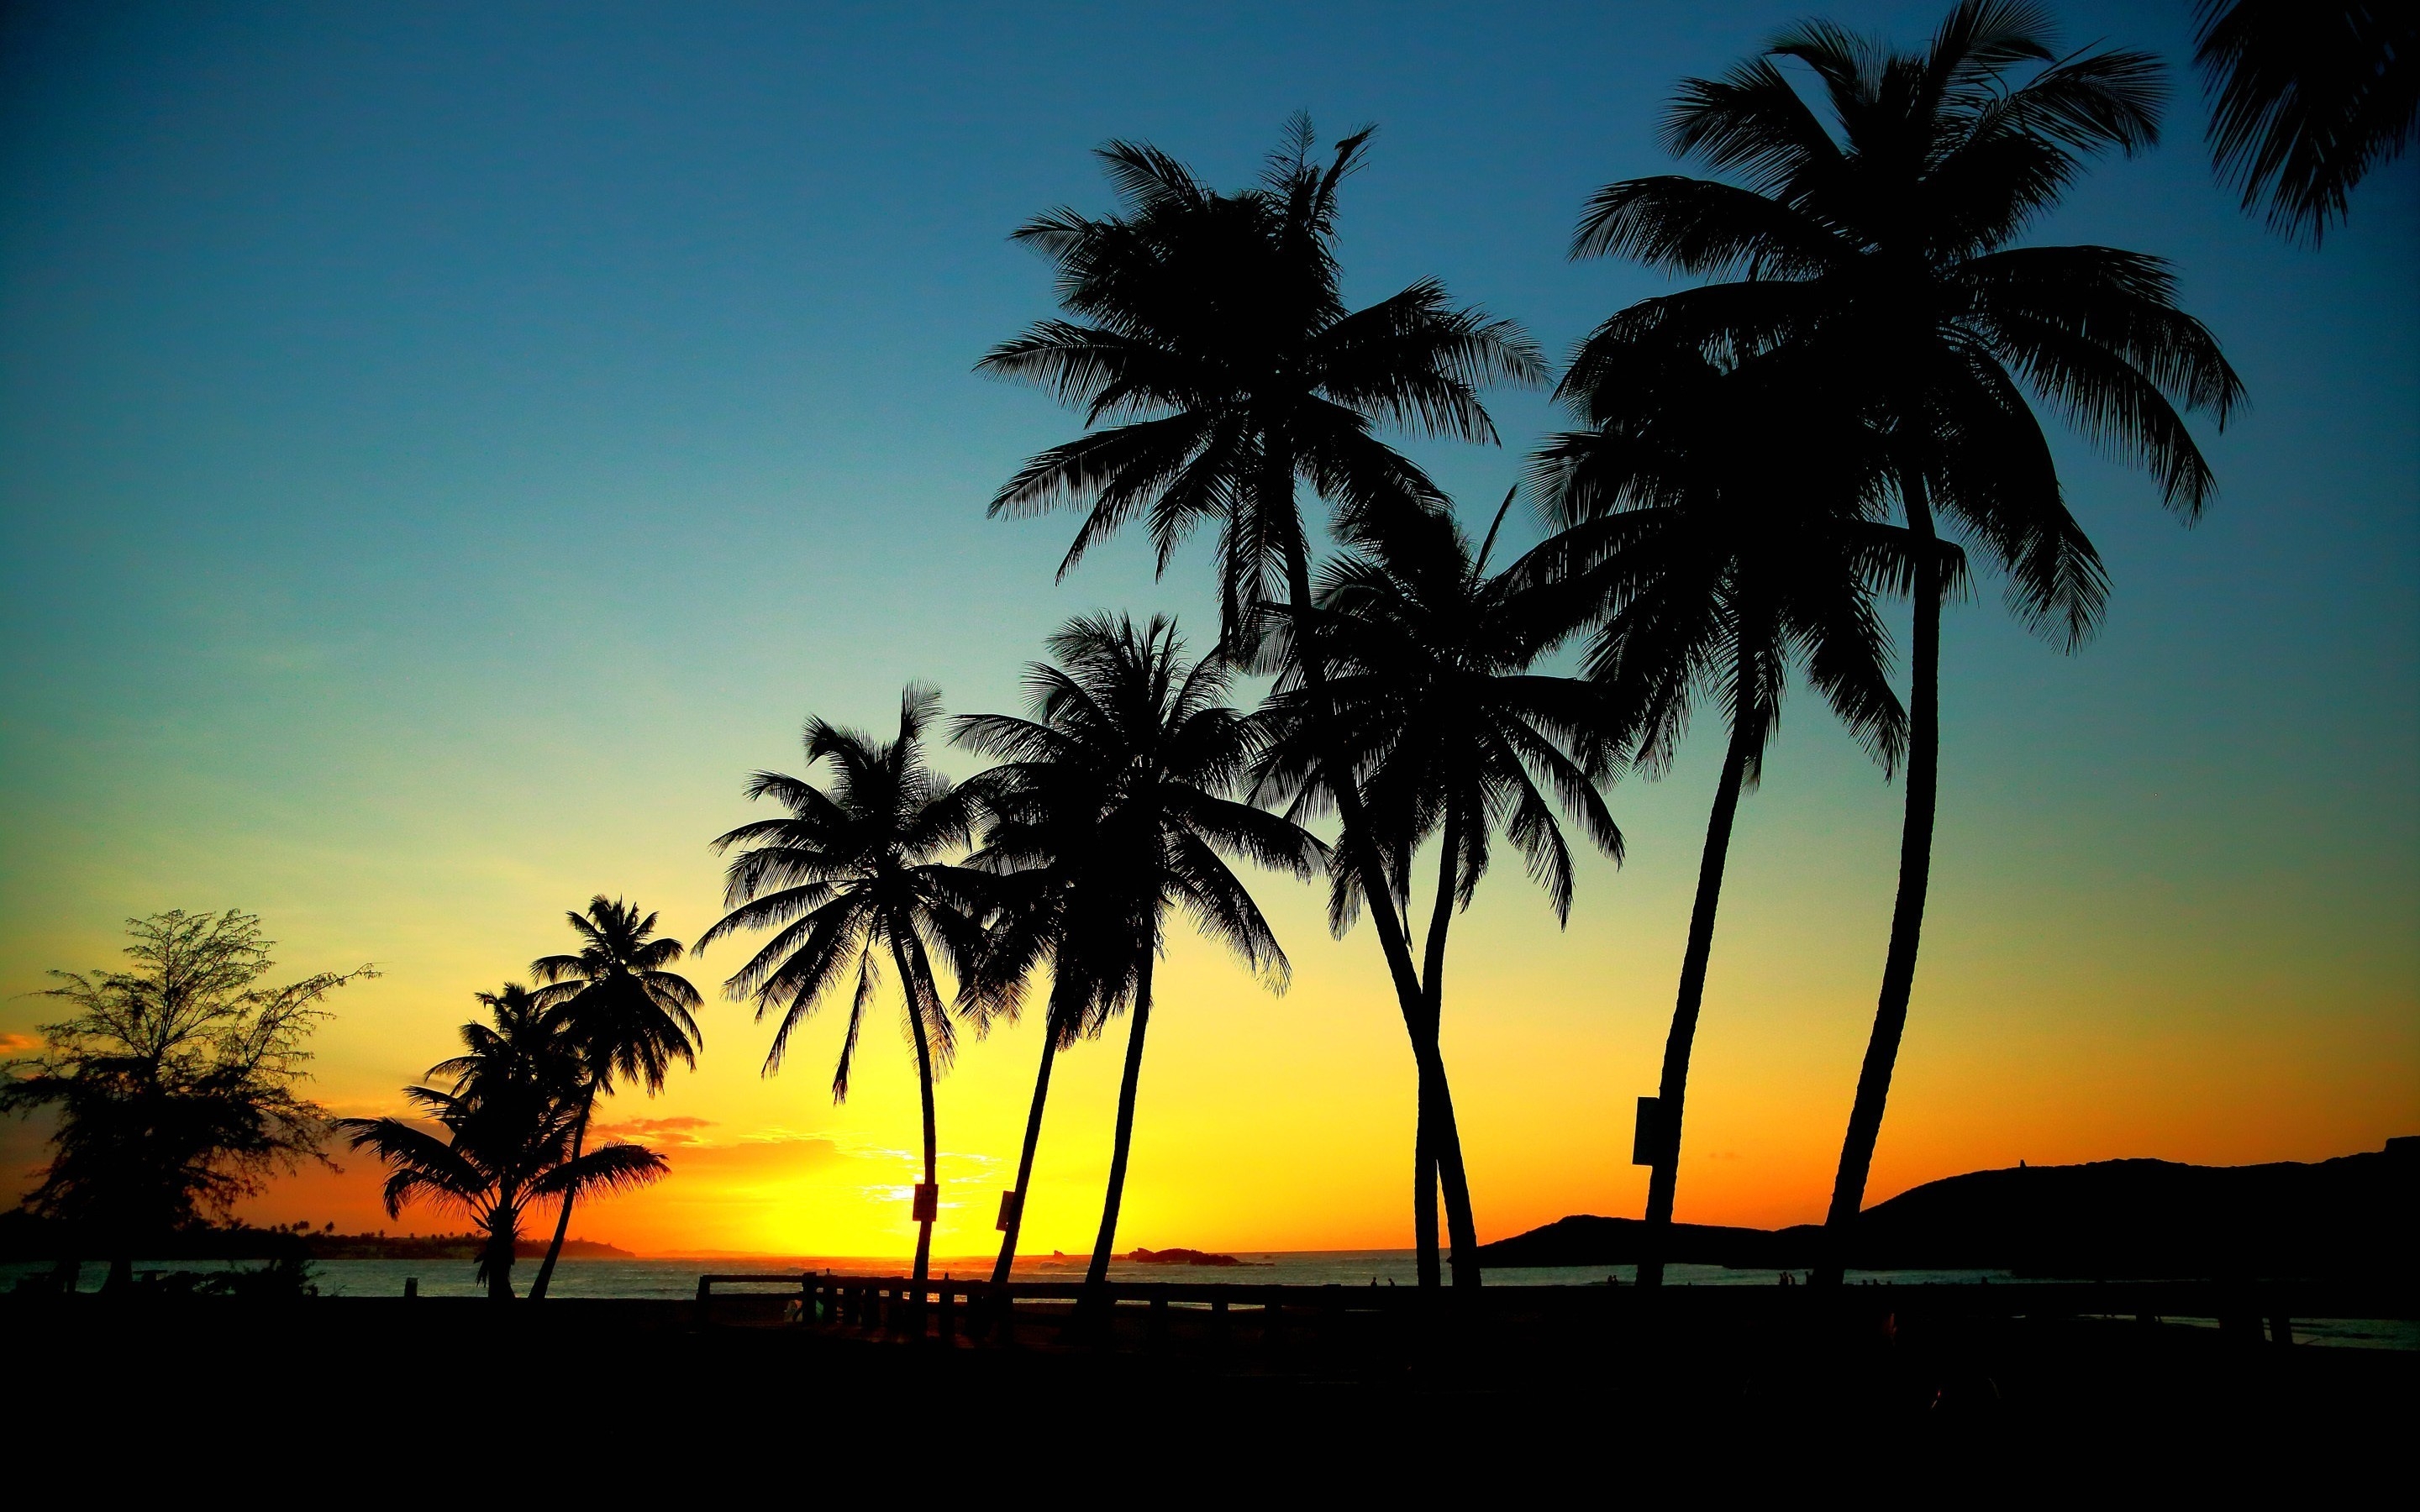 Palm Trees in Sunset for 2880 x 1800 Retina Display resolution